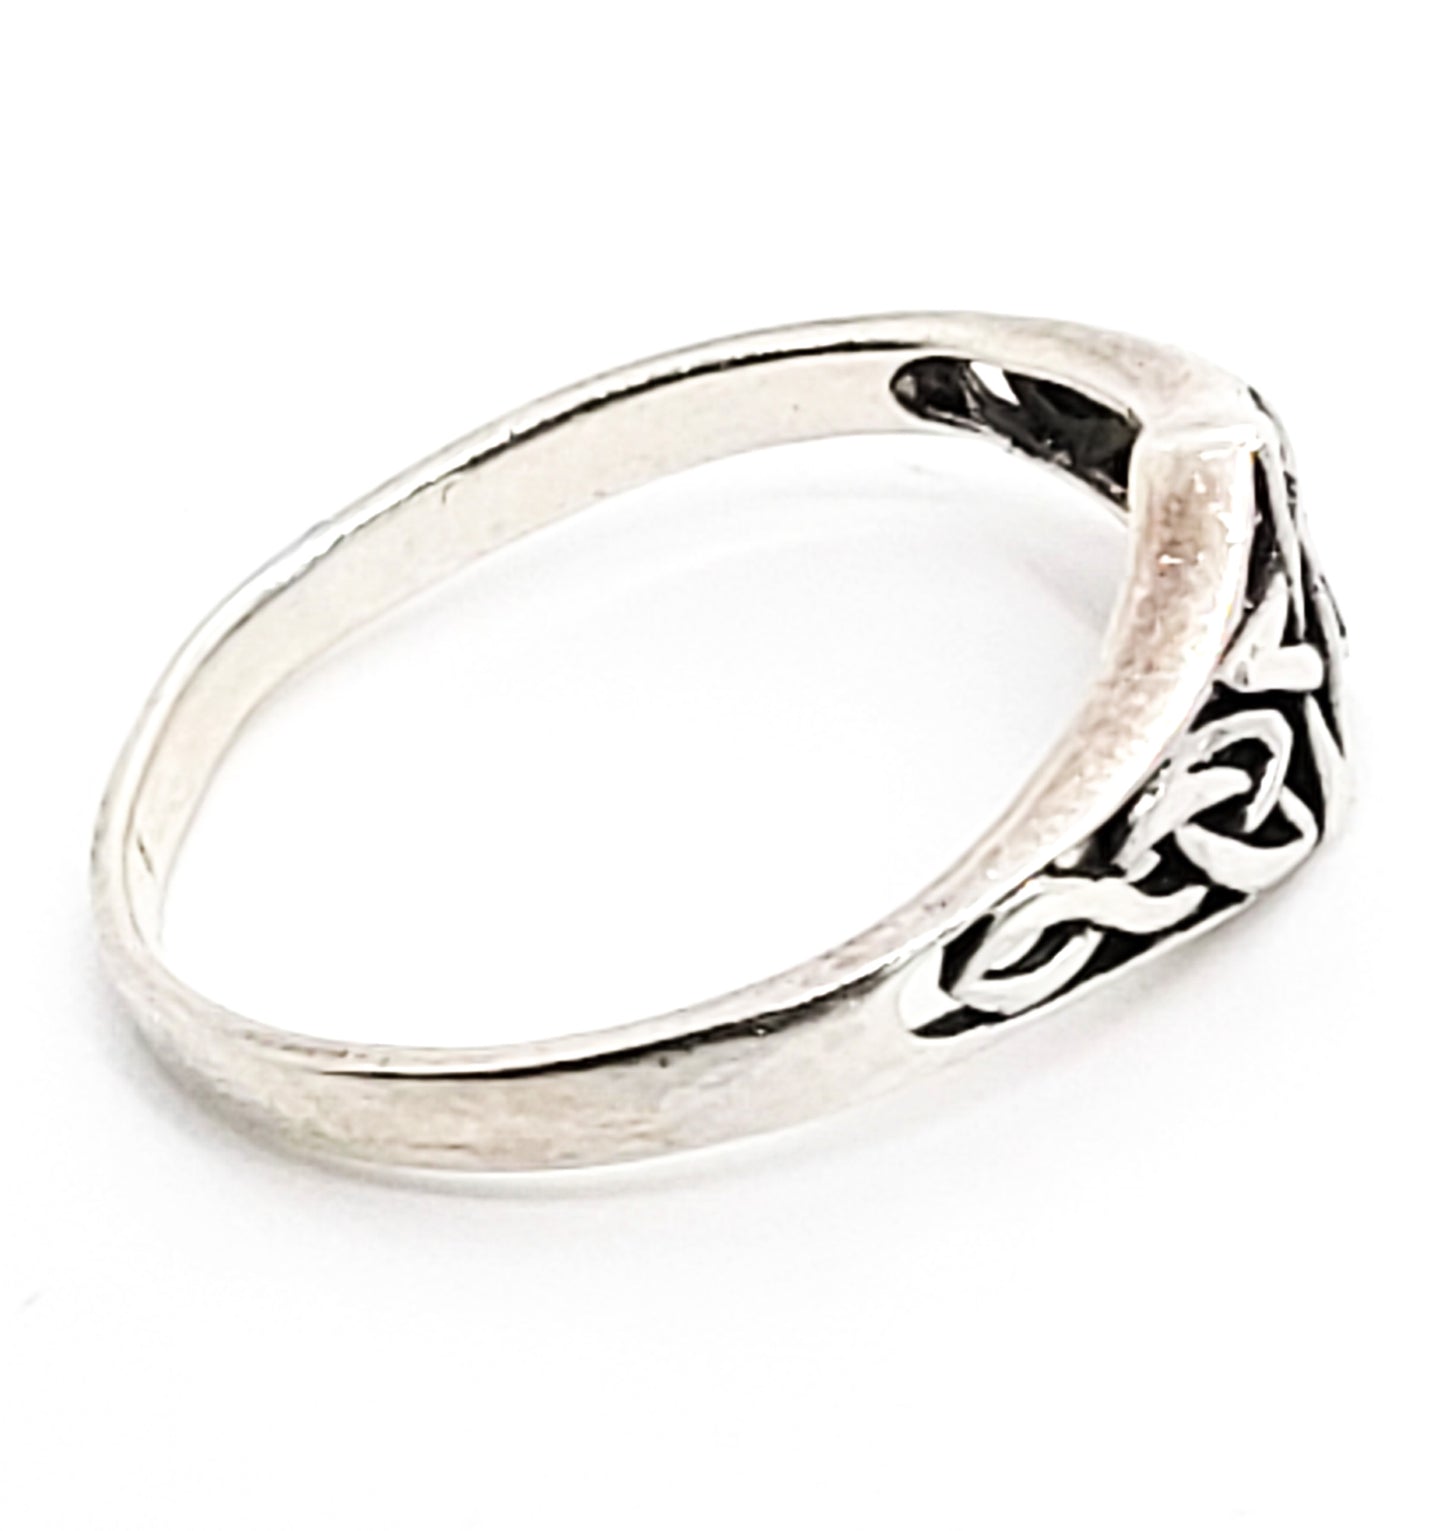 Star pentacle Celtic infinity knot vintage sterling silver band ring size 8